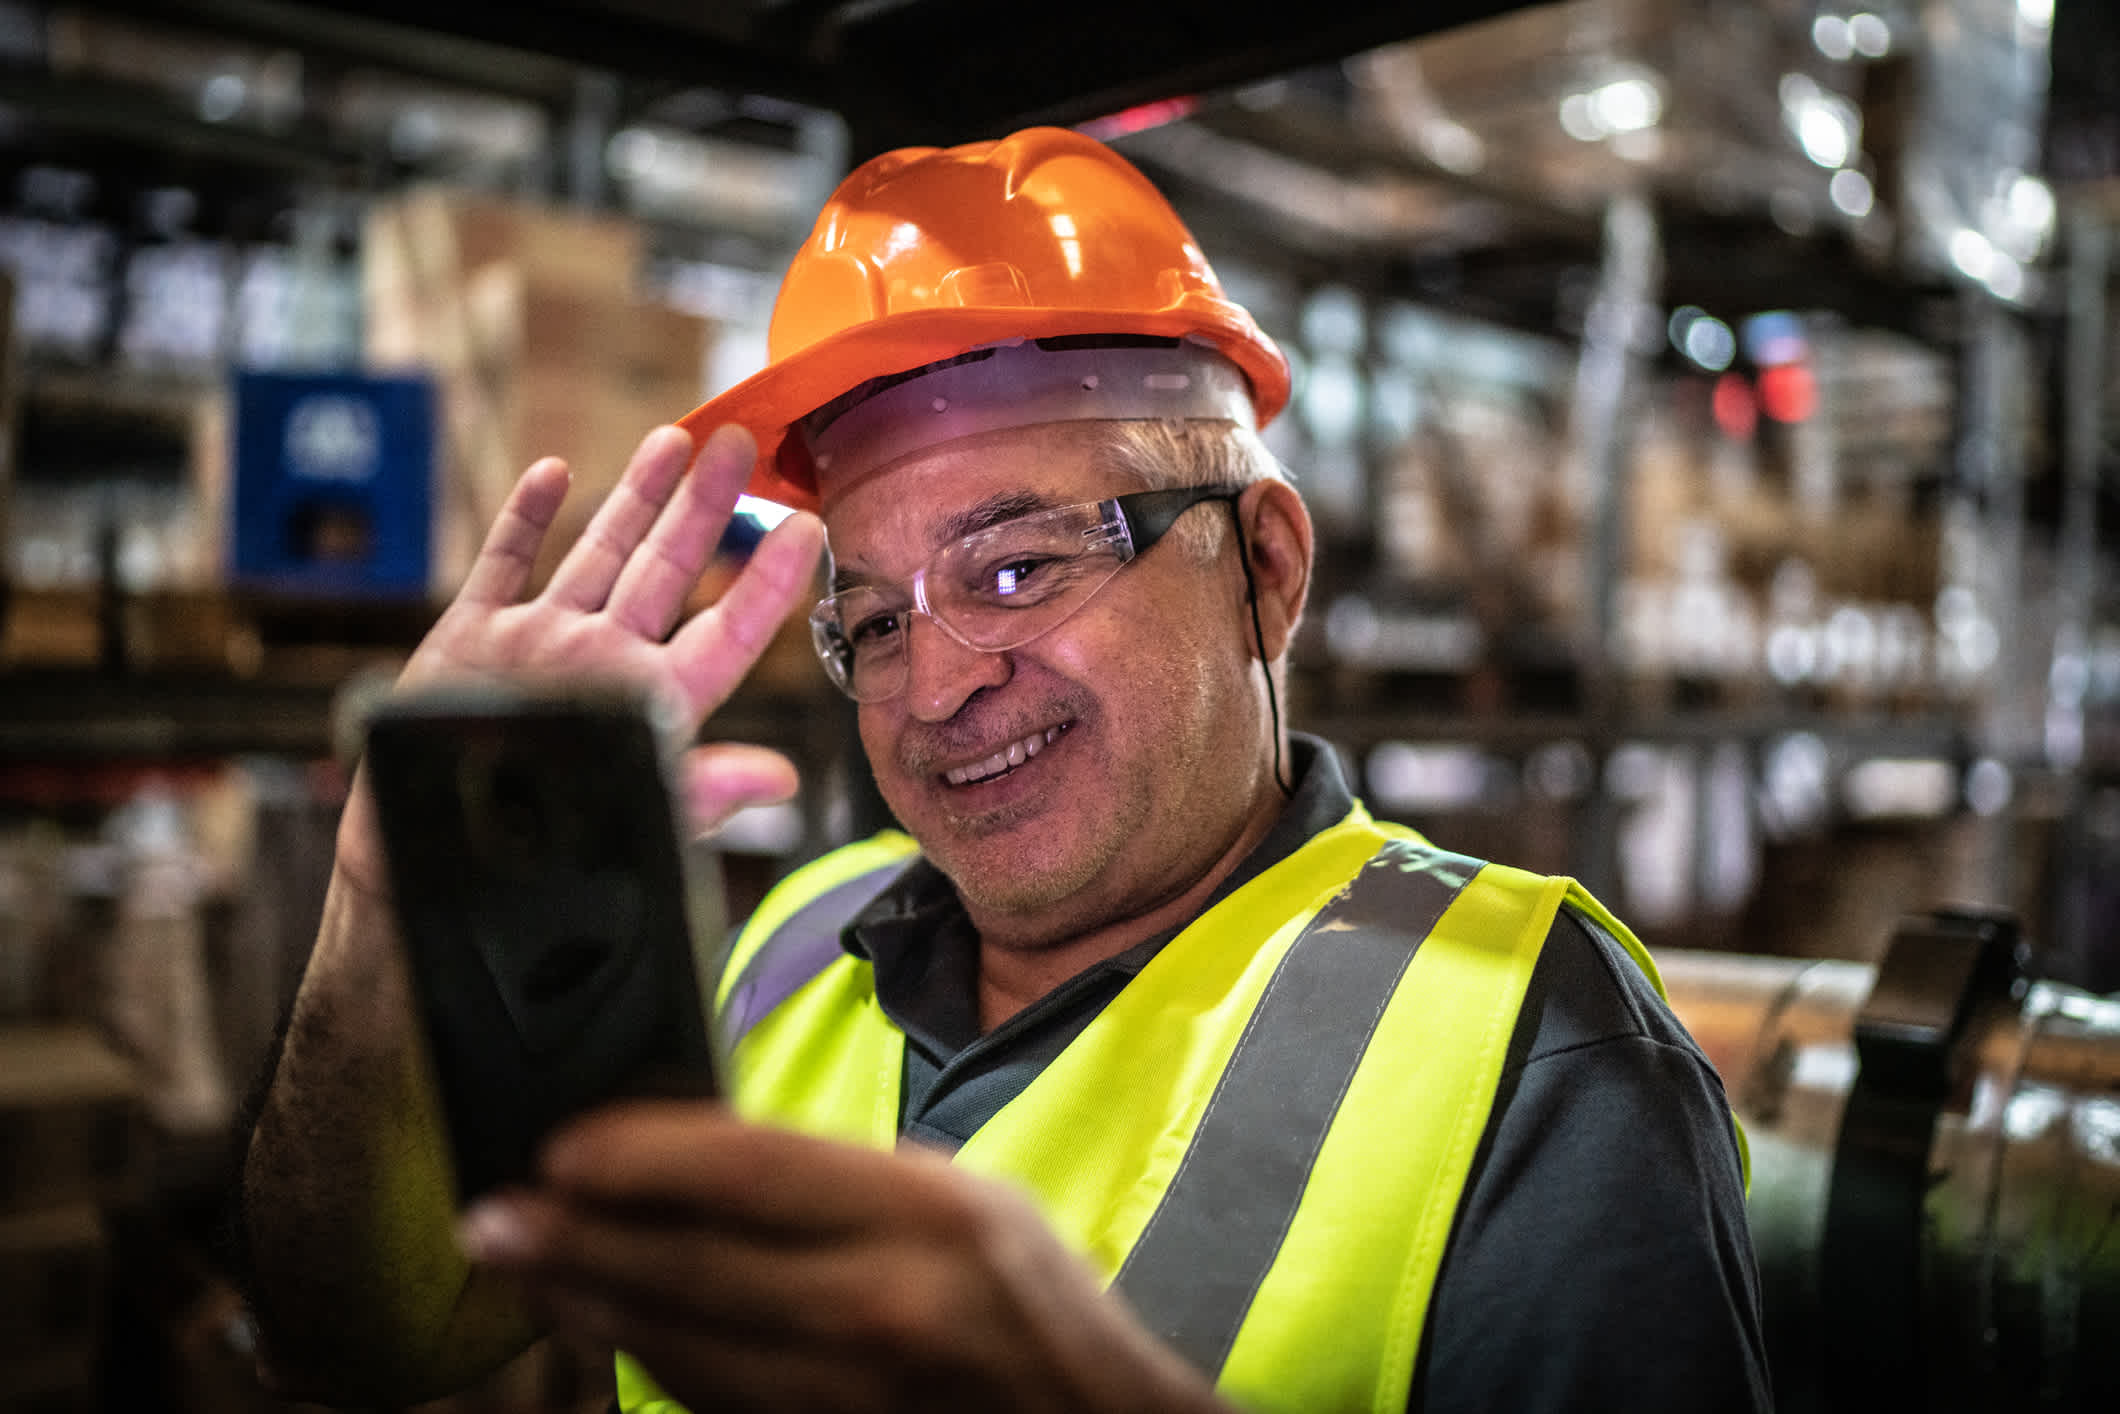 Warehouse worker with a hardhat on holding a phone to record a video in the warehouse. Use-case for video marketing in the manufacturing sector. | Watermark